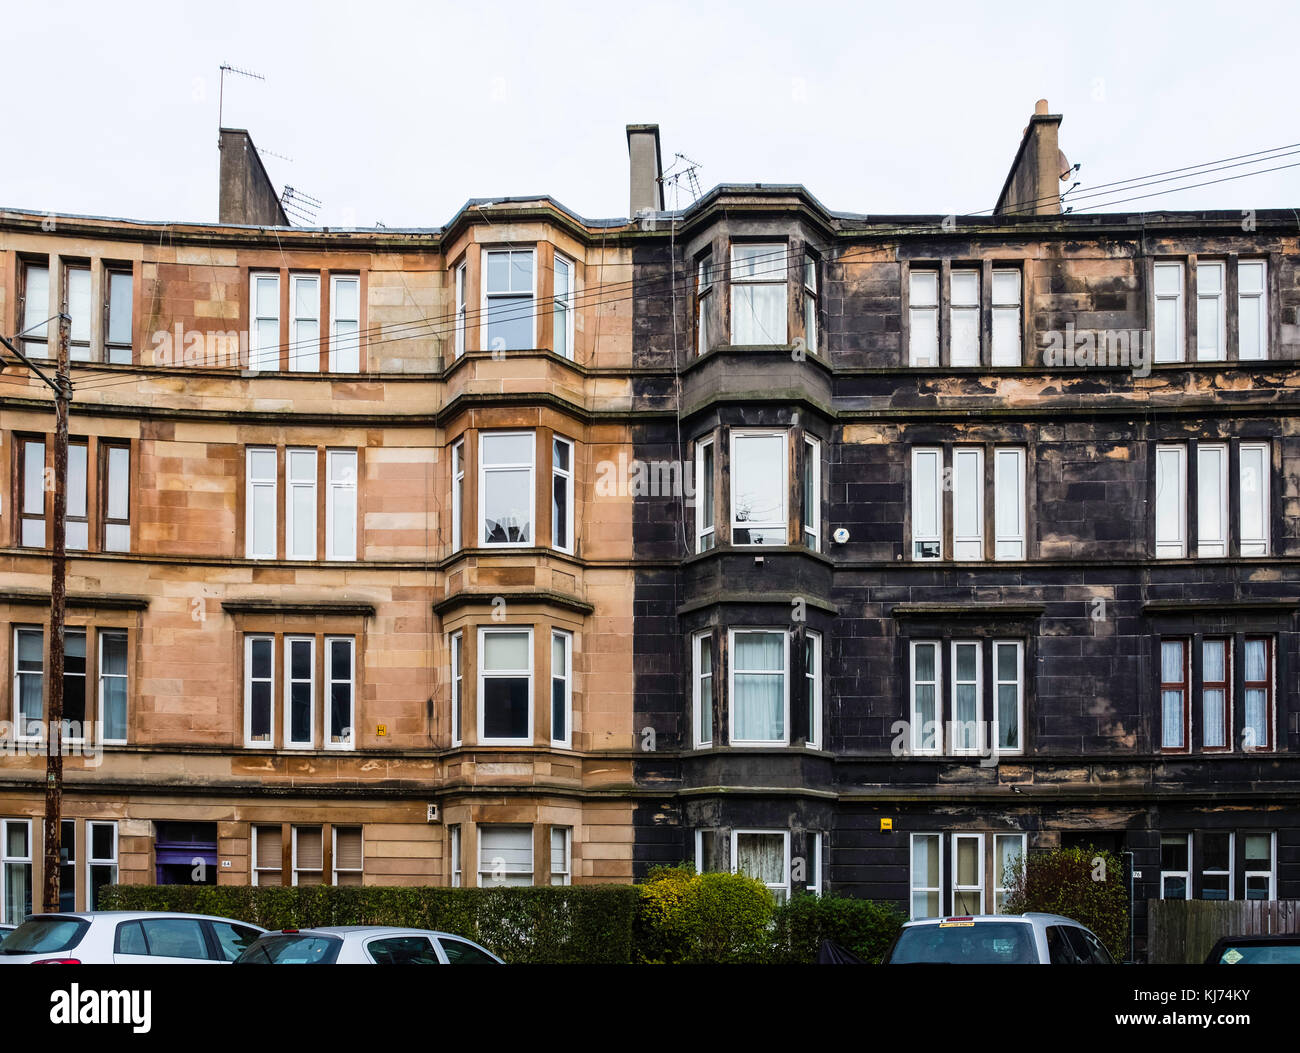 View of typical  sandstone tenement apartment buildings , one after cleaning and the other without cleaning still showing black sooty discolouration i Stock Photo